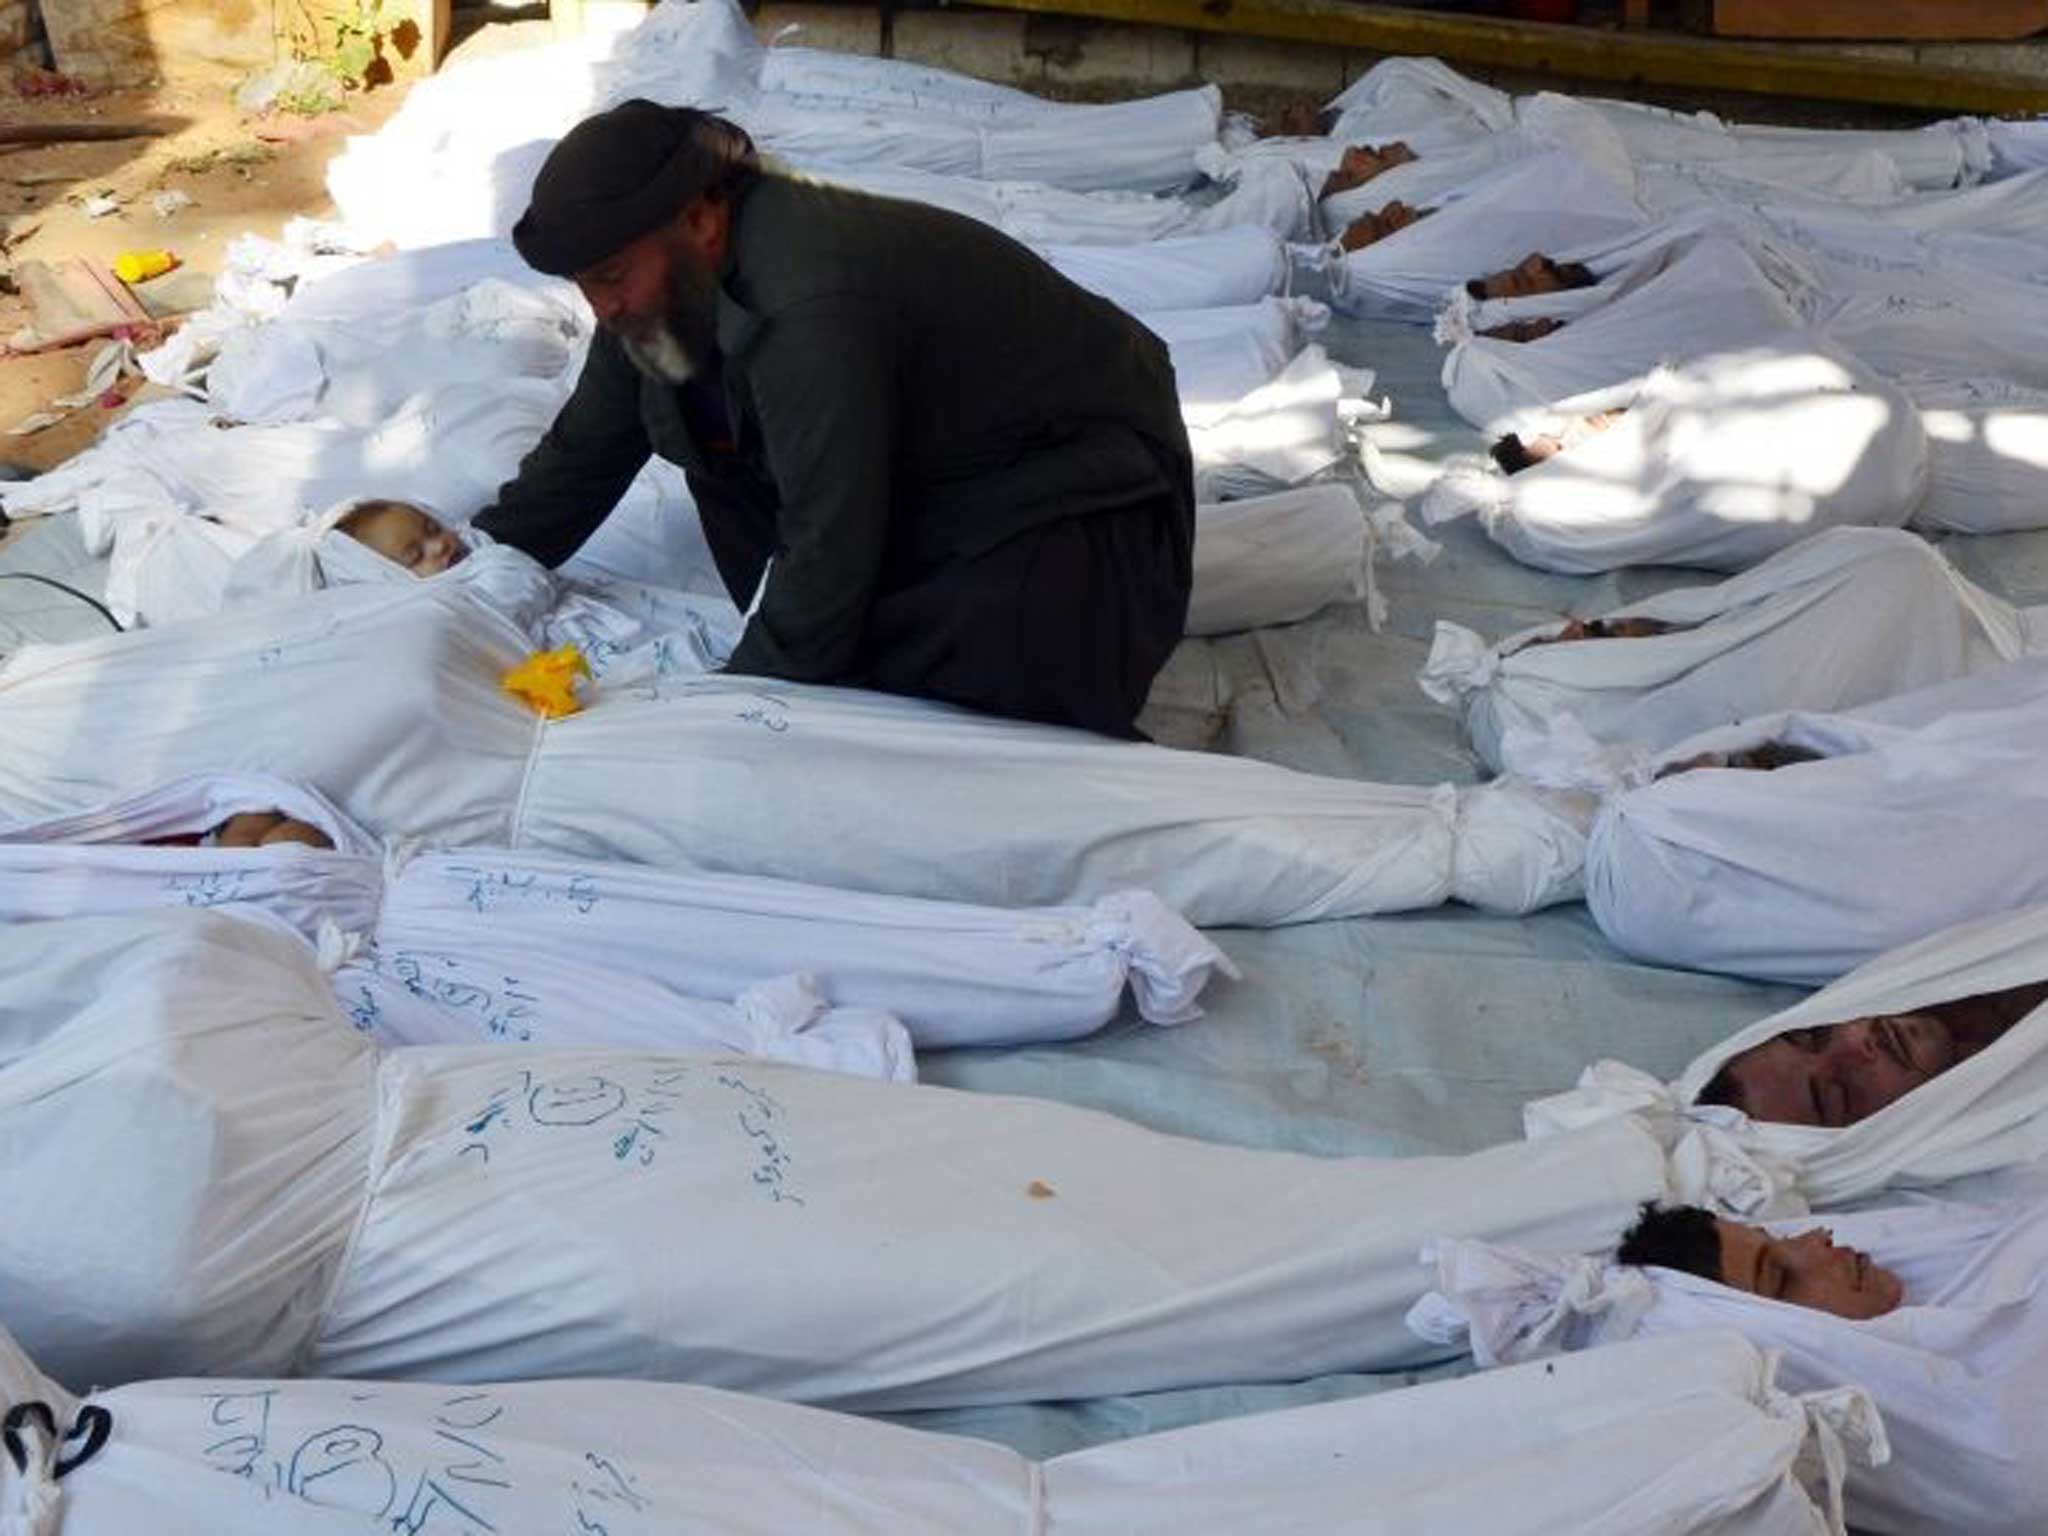 A chemical attack killed at least 213 people in Damascus last August